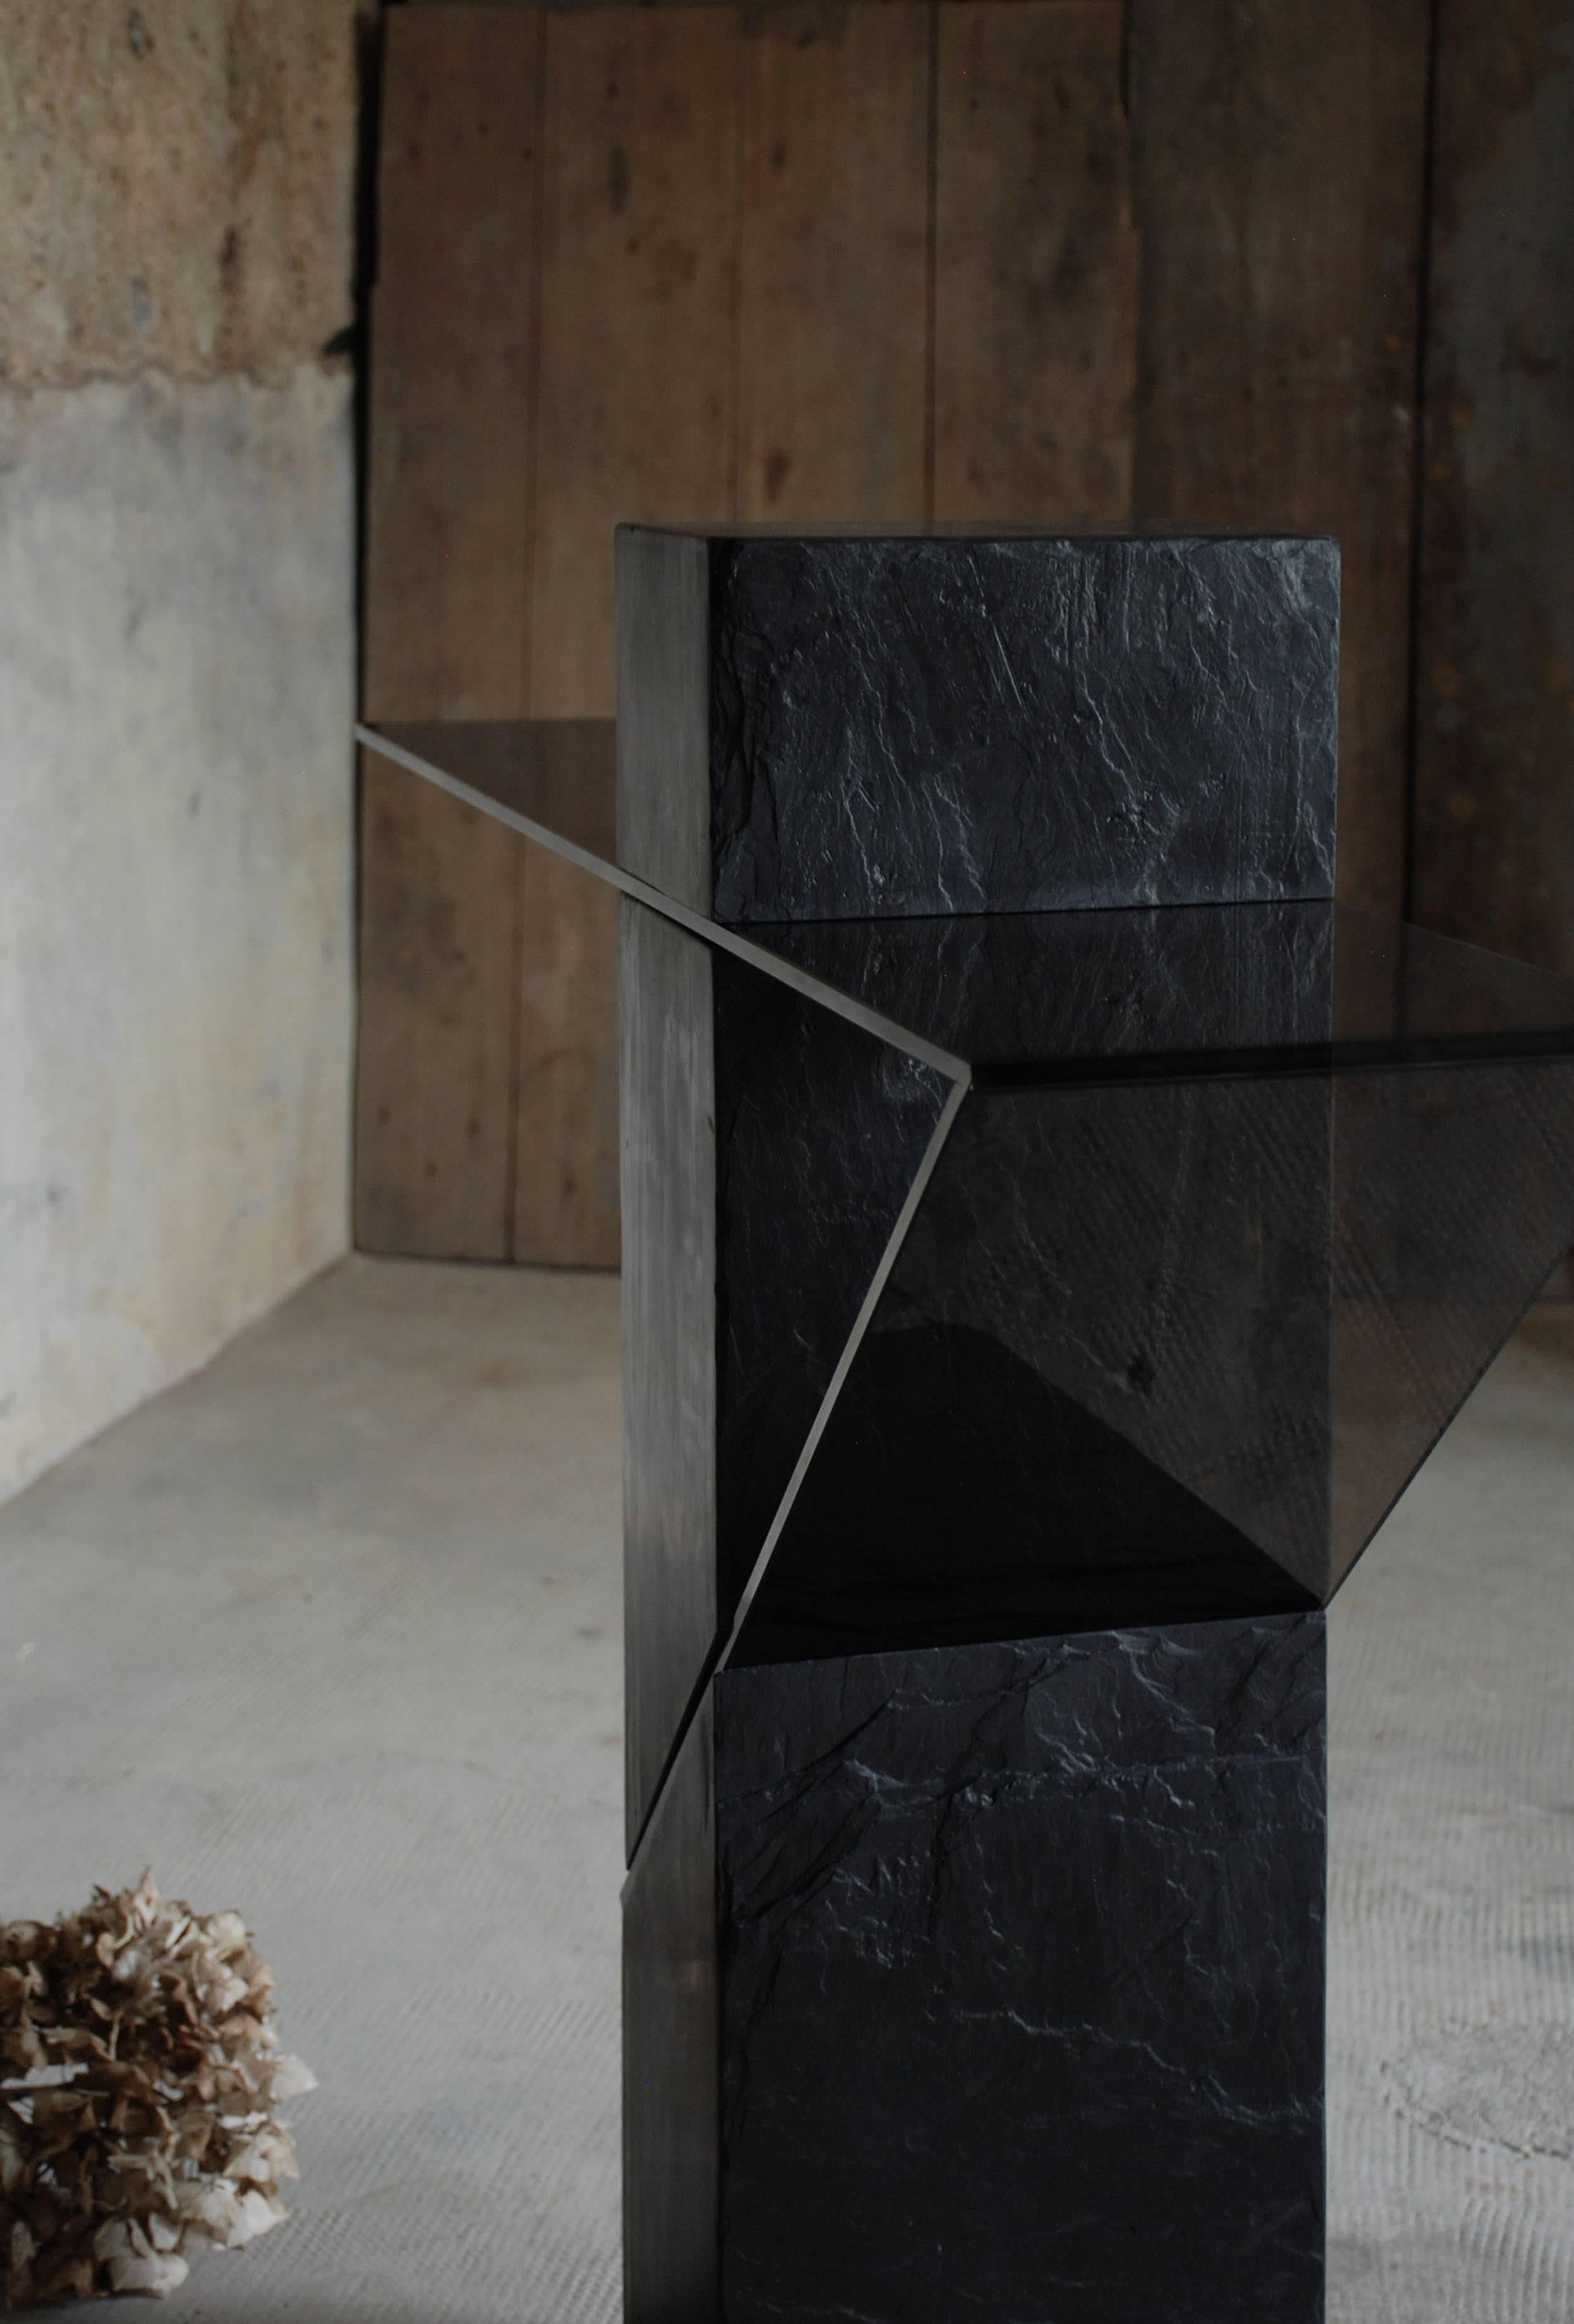 Athlétique console.
 Frédéric Saulou.
 Materials: Trélazé black slate - gray smoked glass.
 Dimensions: 87 x 110 x 18 cm.

 Edition of eight.
 Signed and numbered.

 “While wandering in the streets I have been observing buildings
